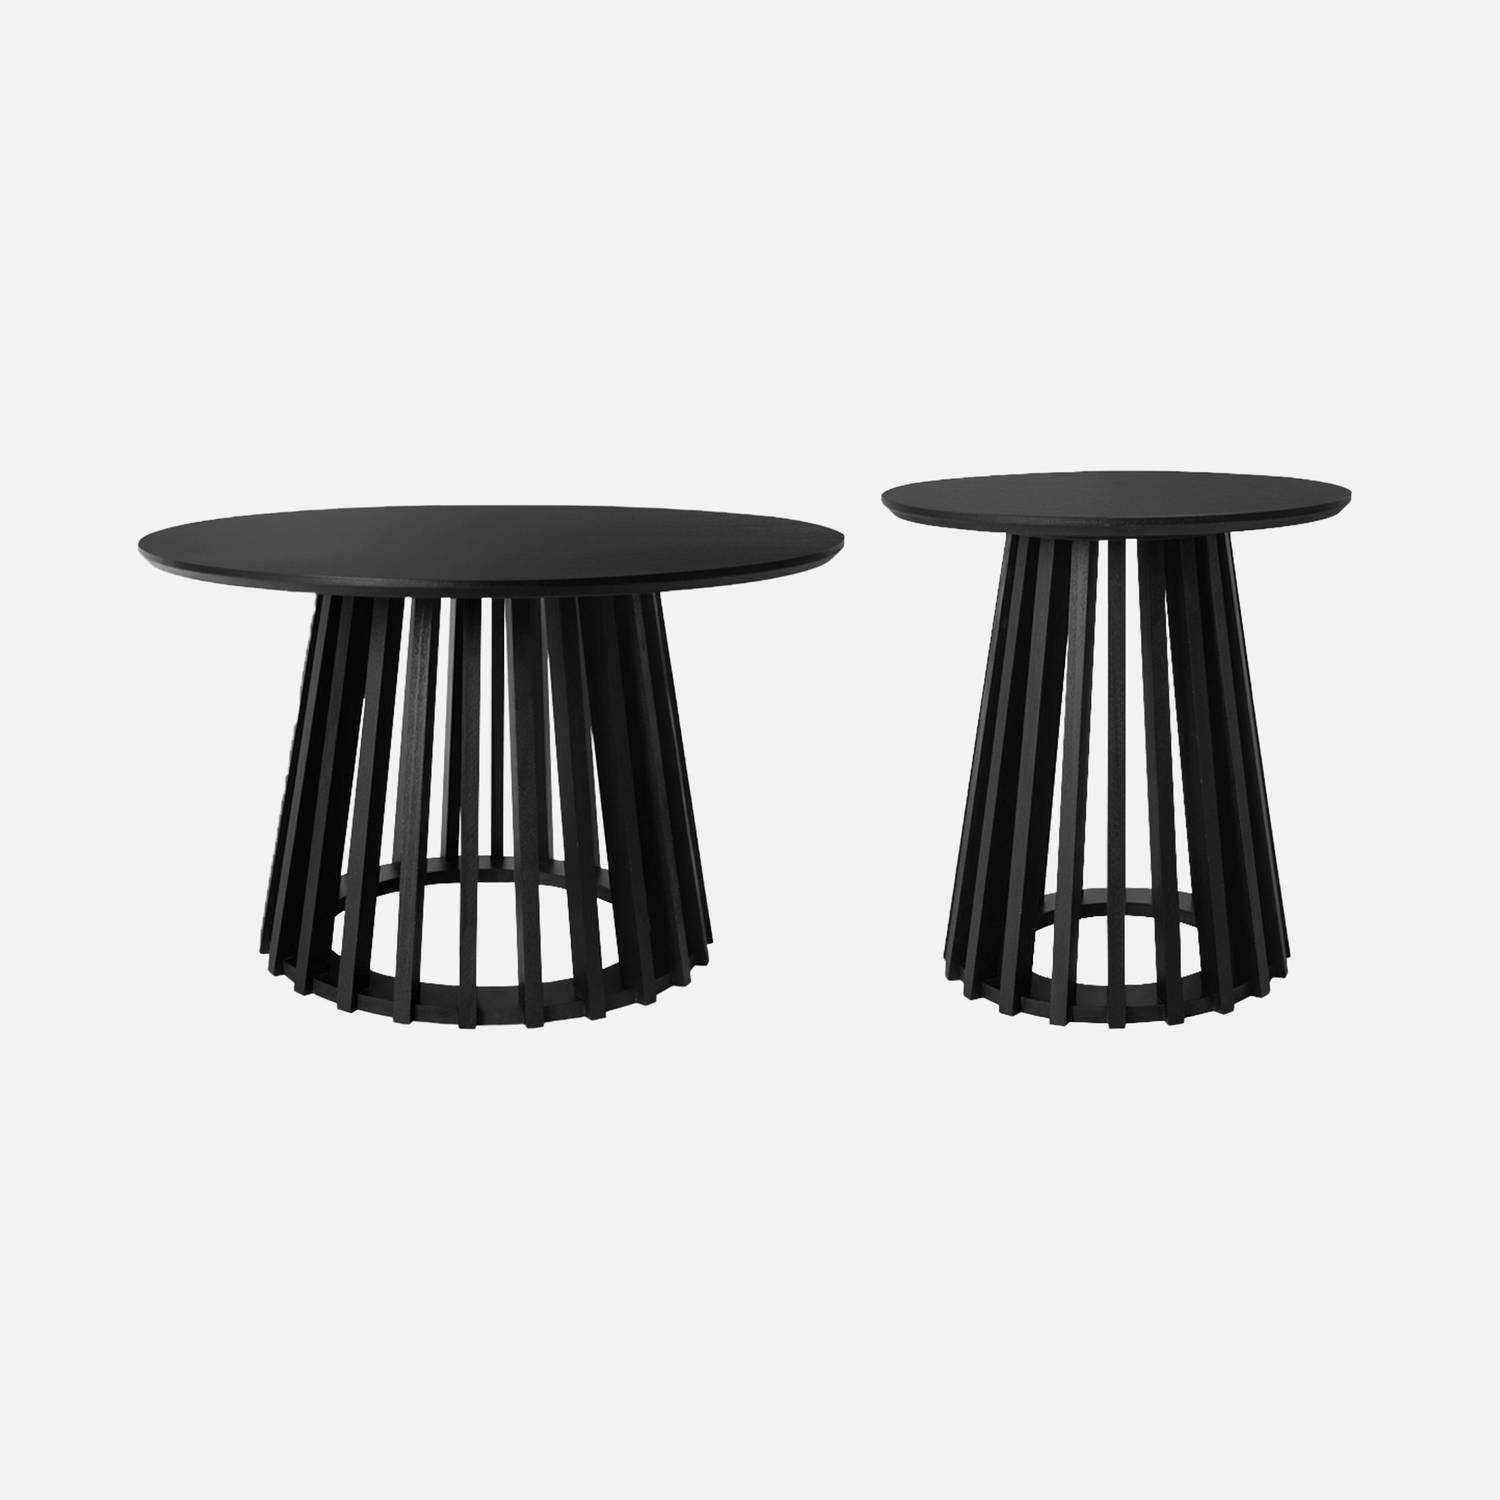 Set of 2 round coffee tables with black wood-effect tops and fir-wood legs, 40cm and 60cm Photo1